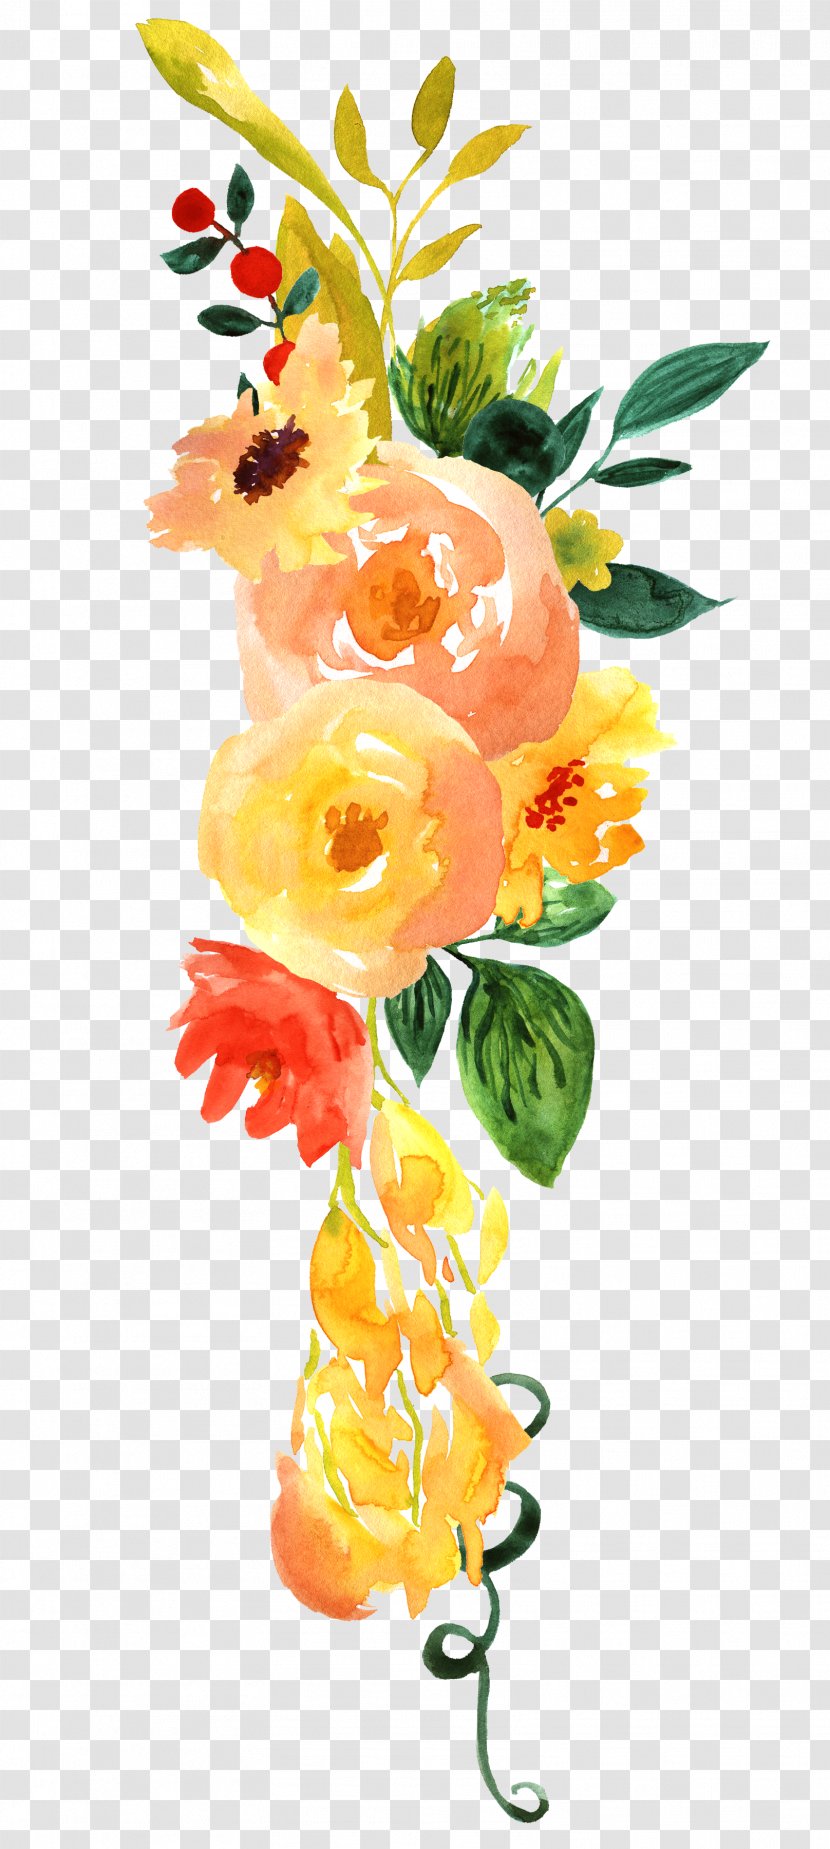 Floral Design Watercolor Painting Flower - Floristry - Hand Painted Decoration Pattern Transparent PNG